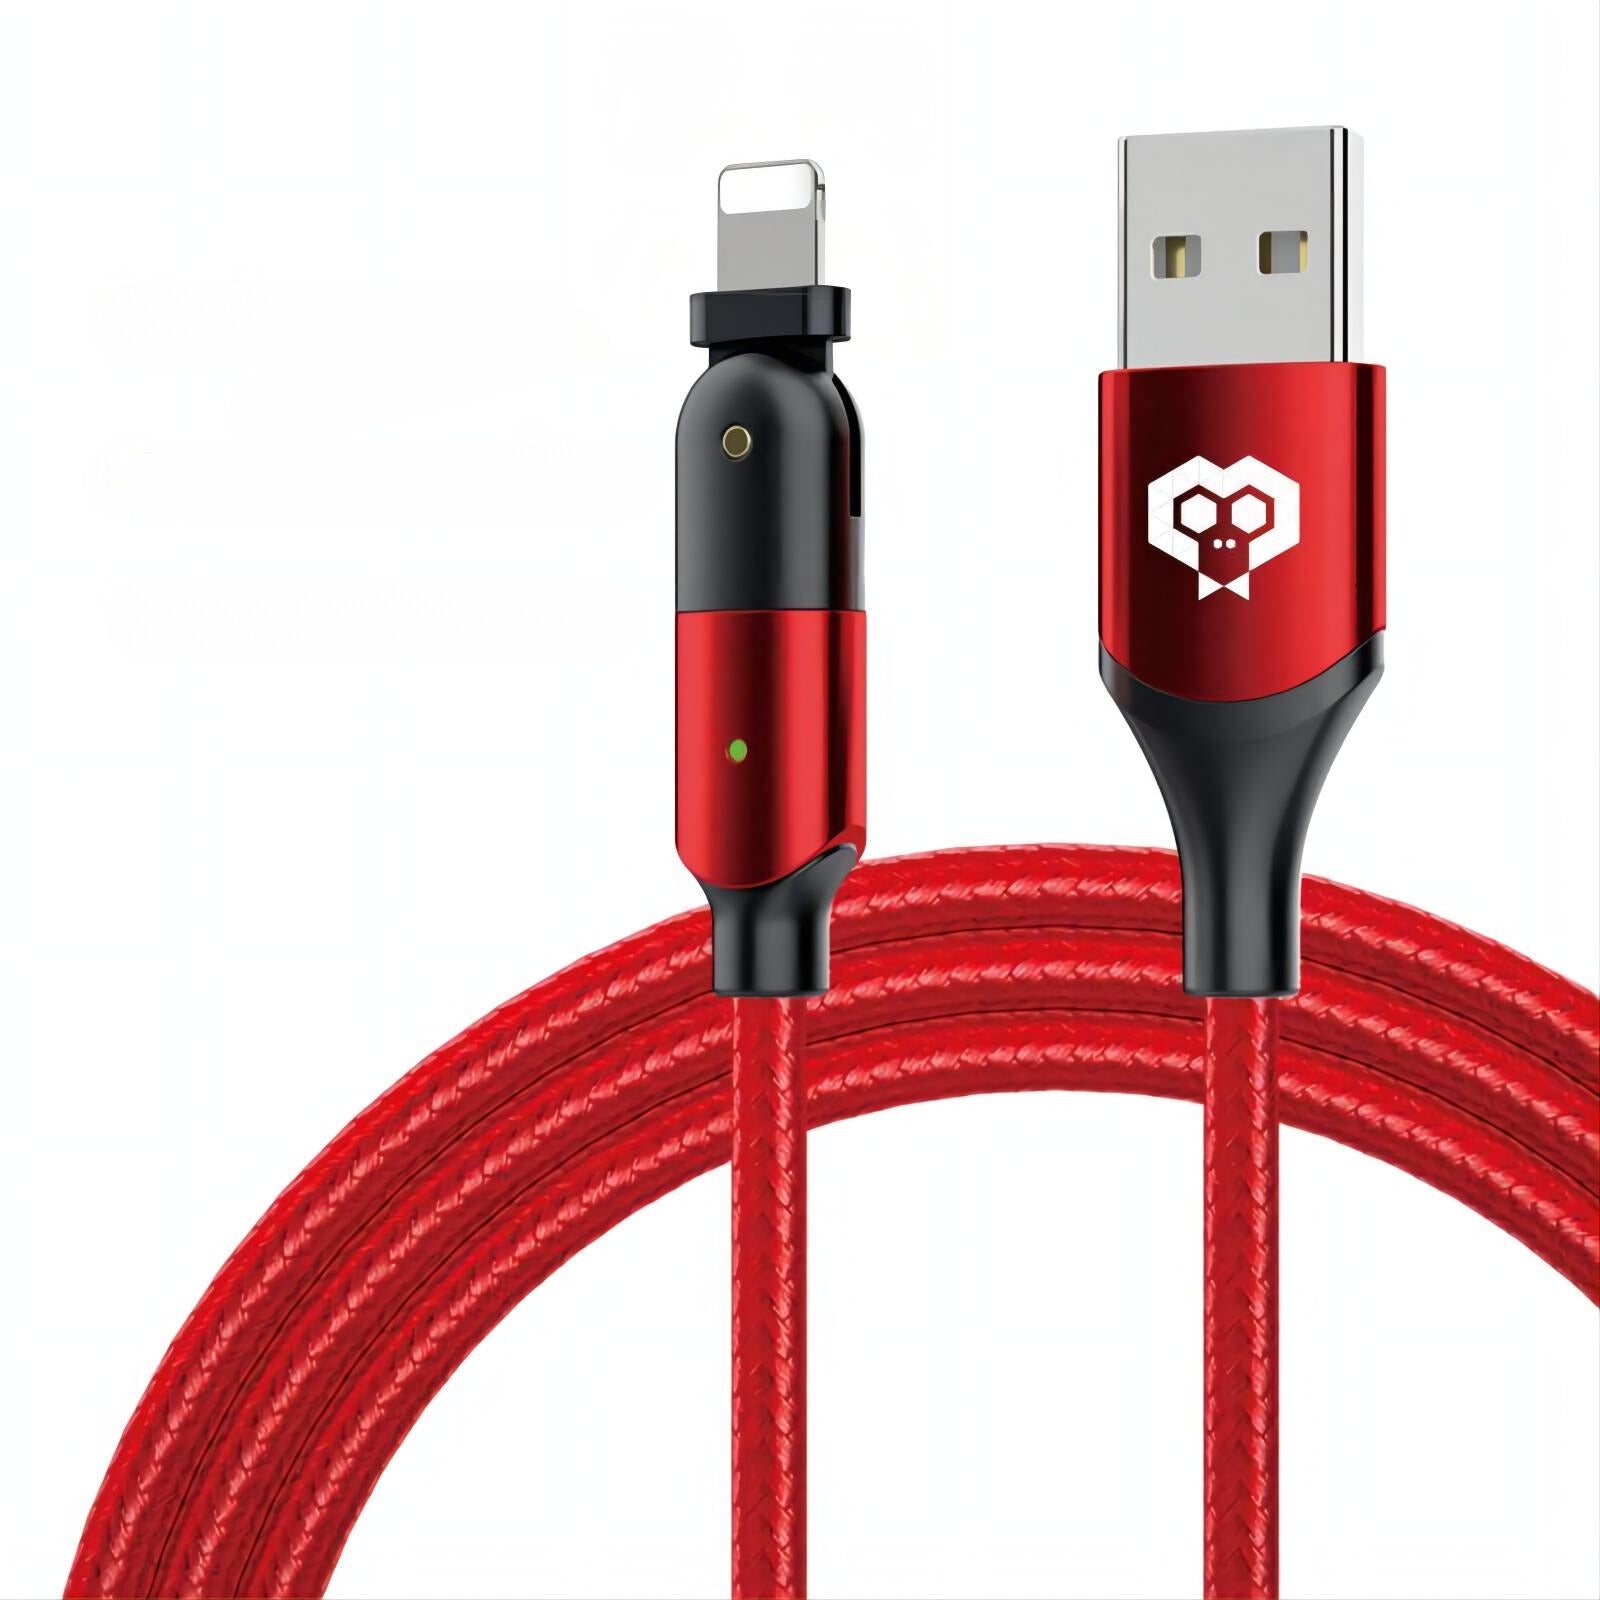 MonkeyTEC USB C to Lightning cable for Apple iPhone with quick charging function and 180° rotation PD-8P-180